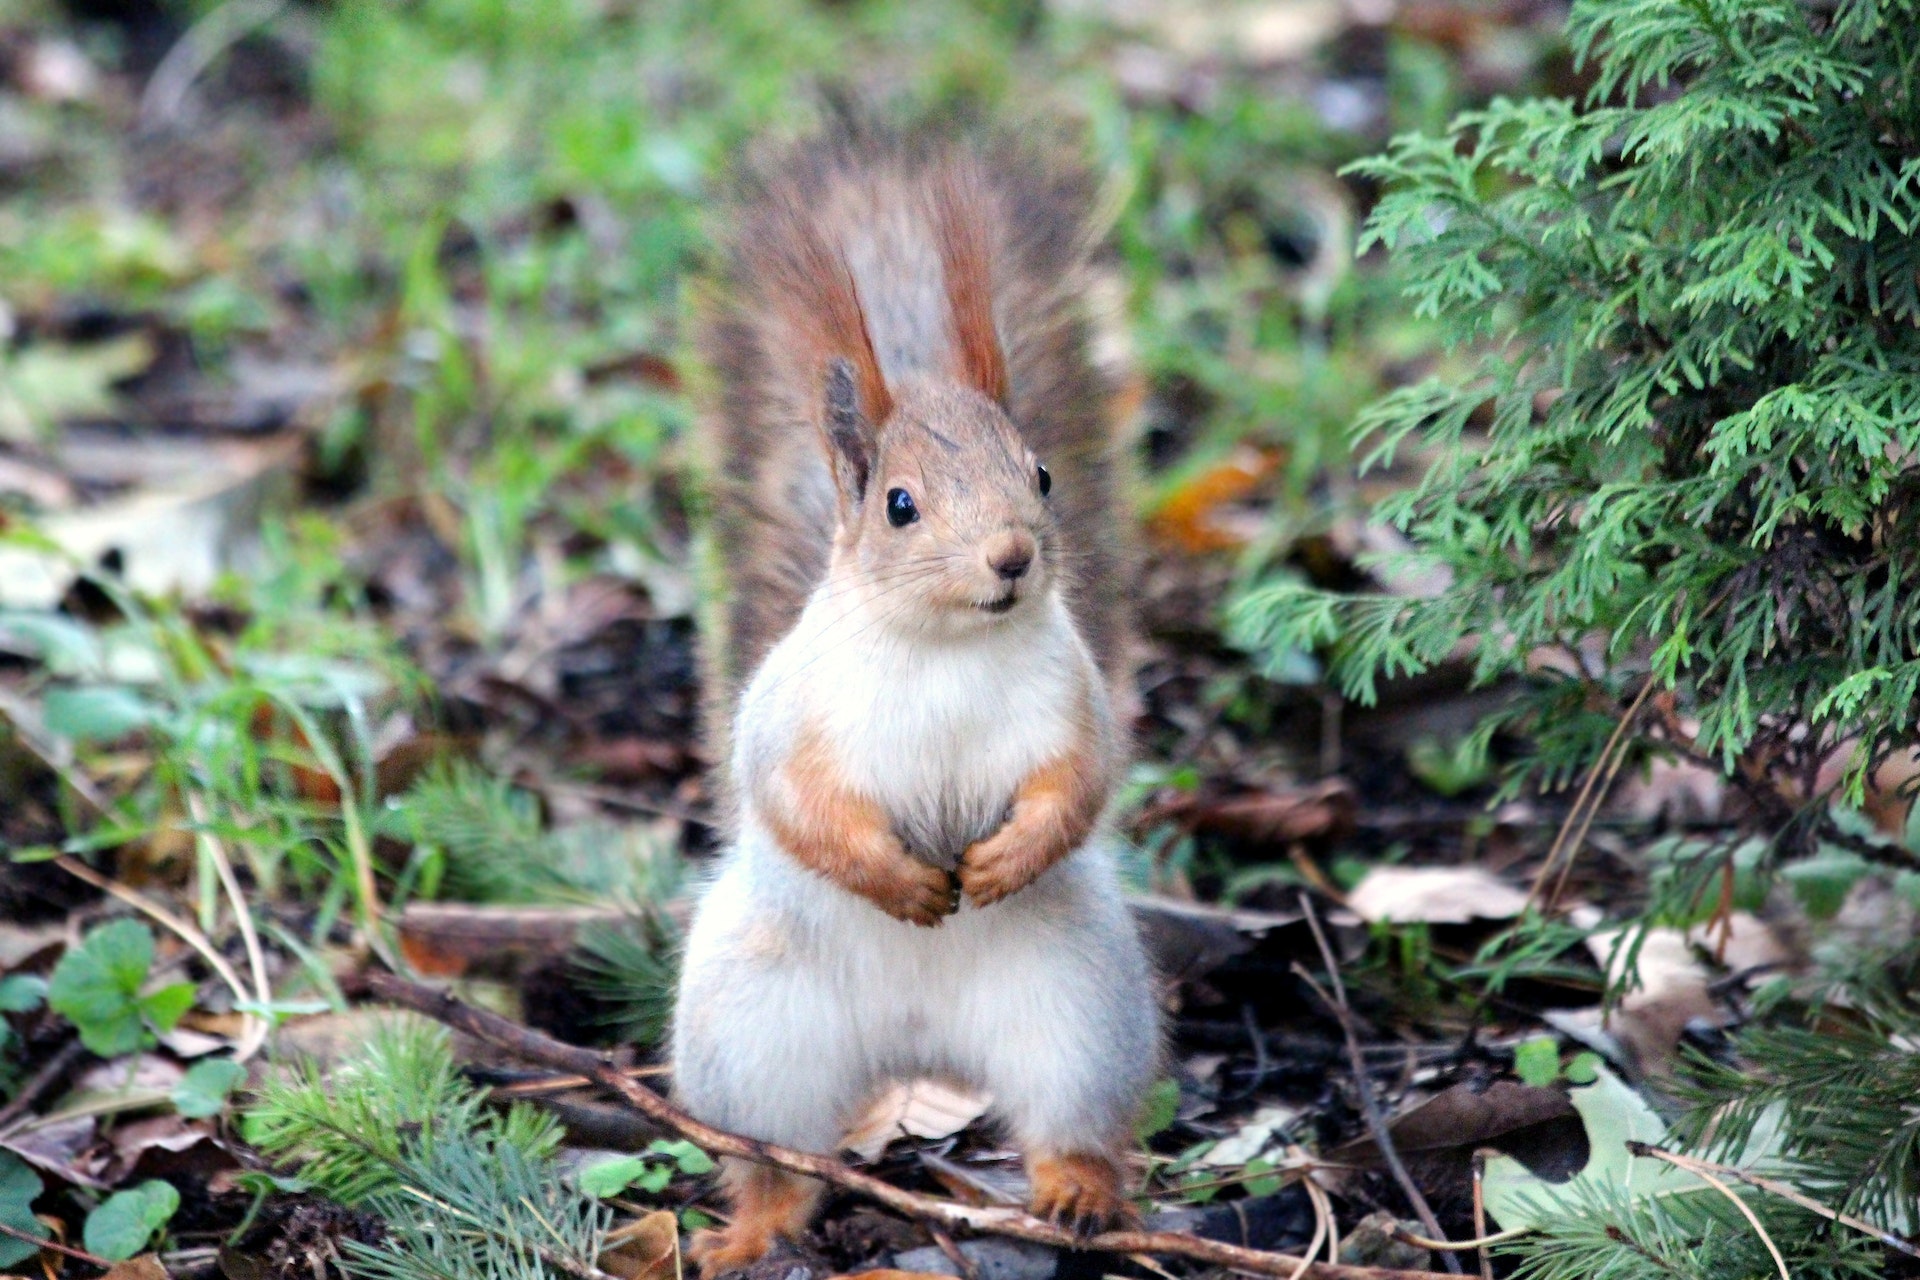 Discovering the Fascinating World of Squirrels: From Tree-Dwellers to City-Dwellers